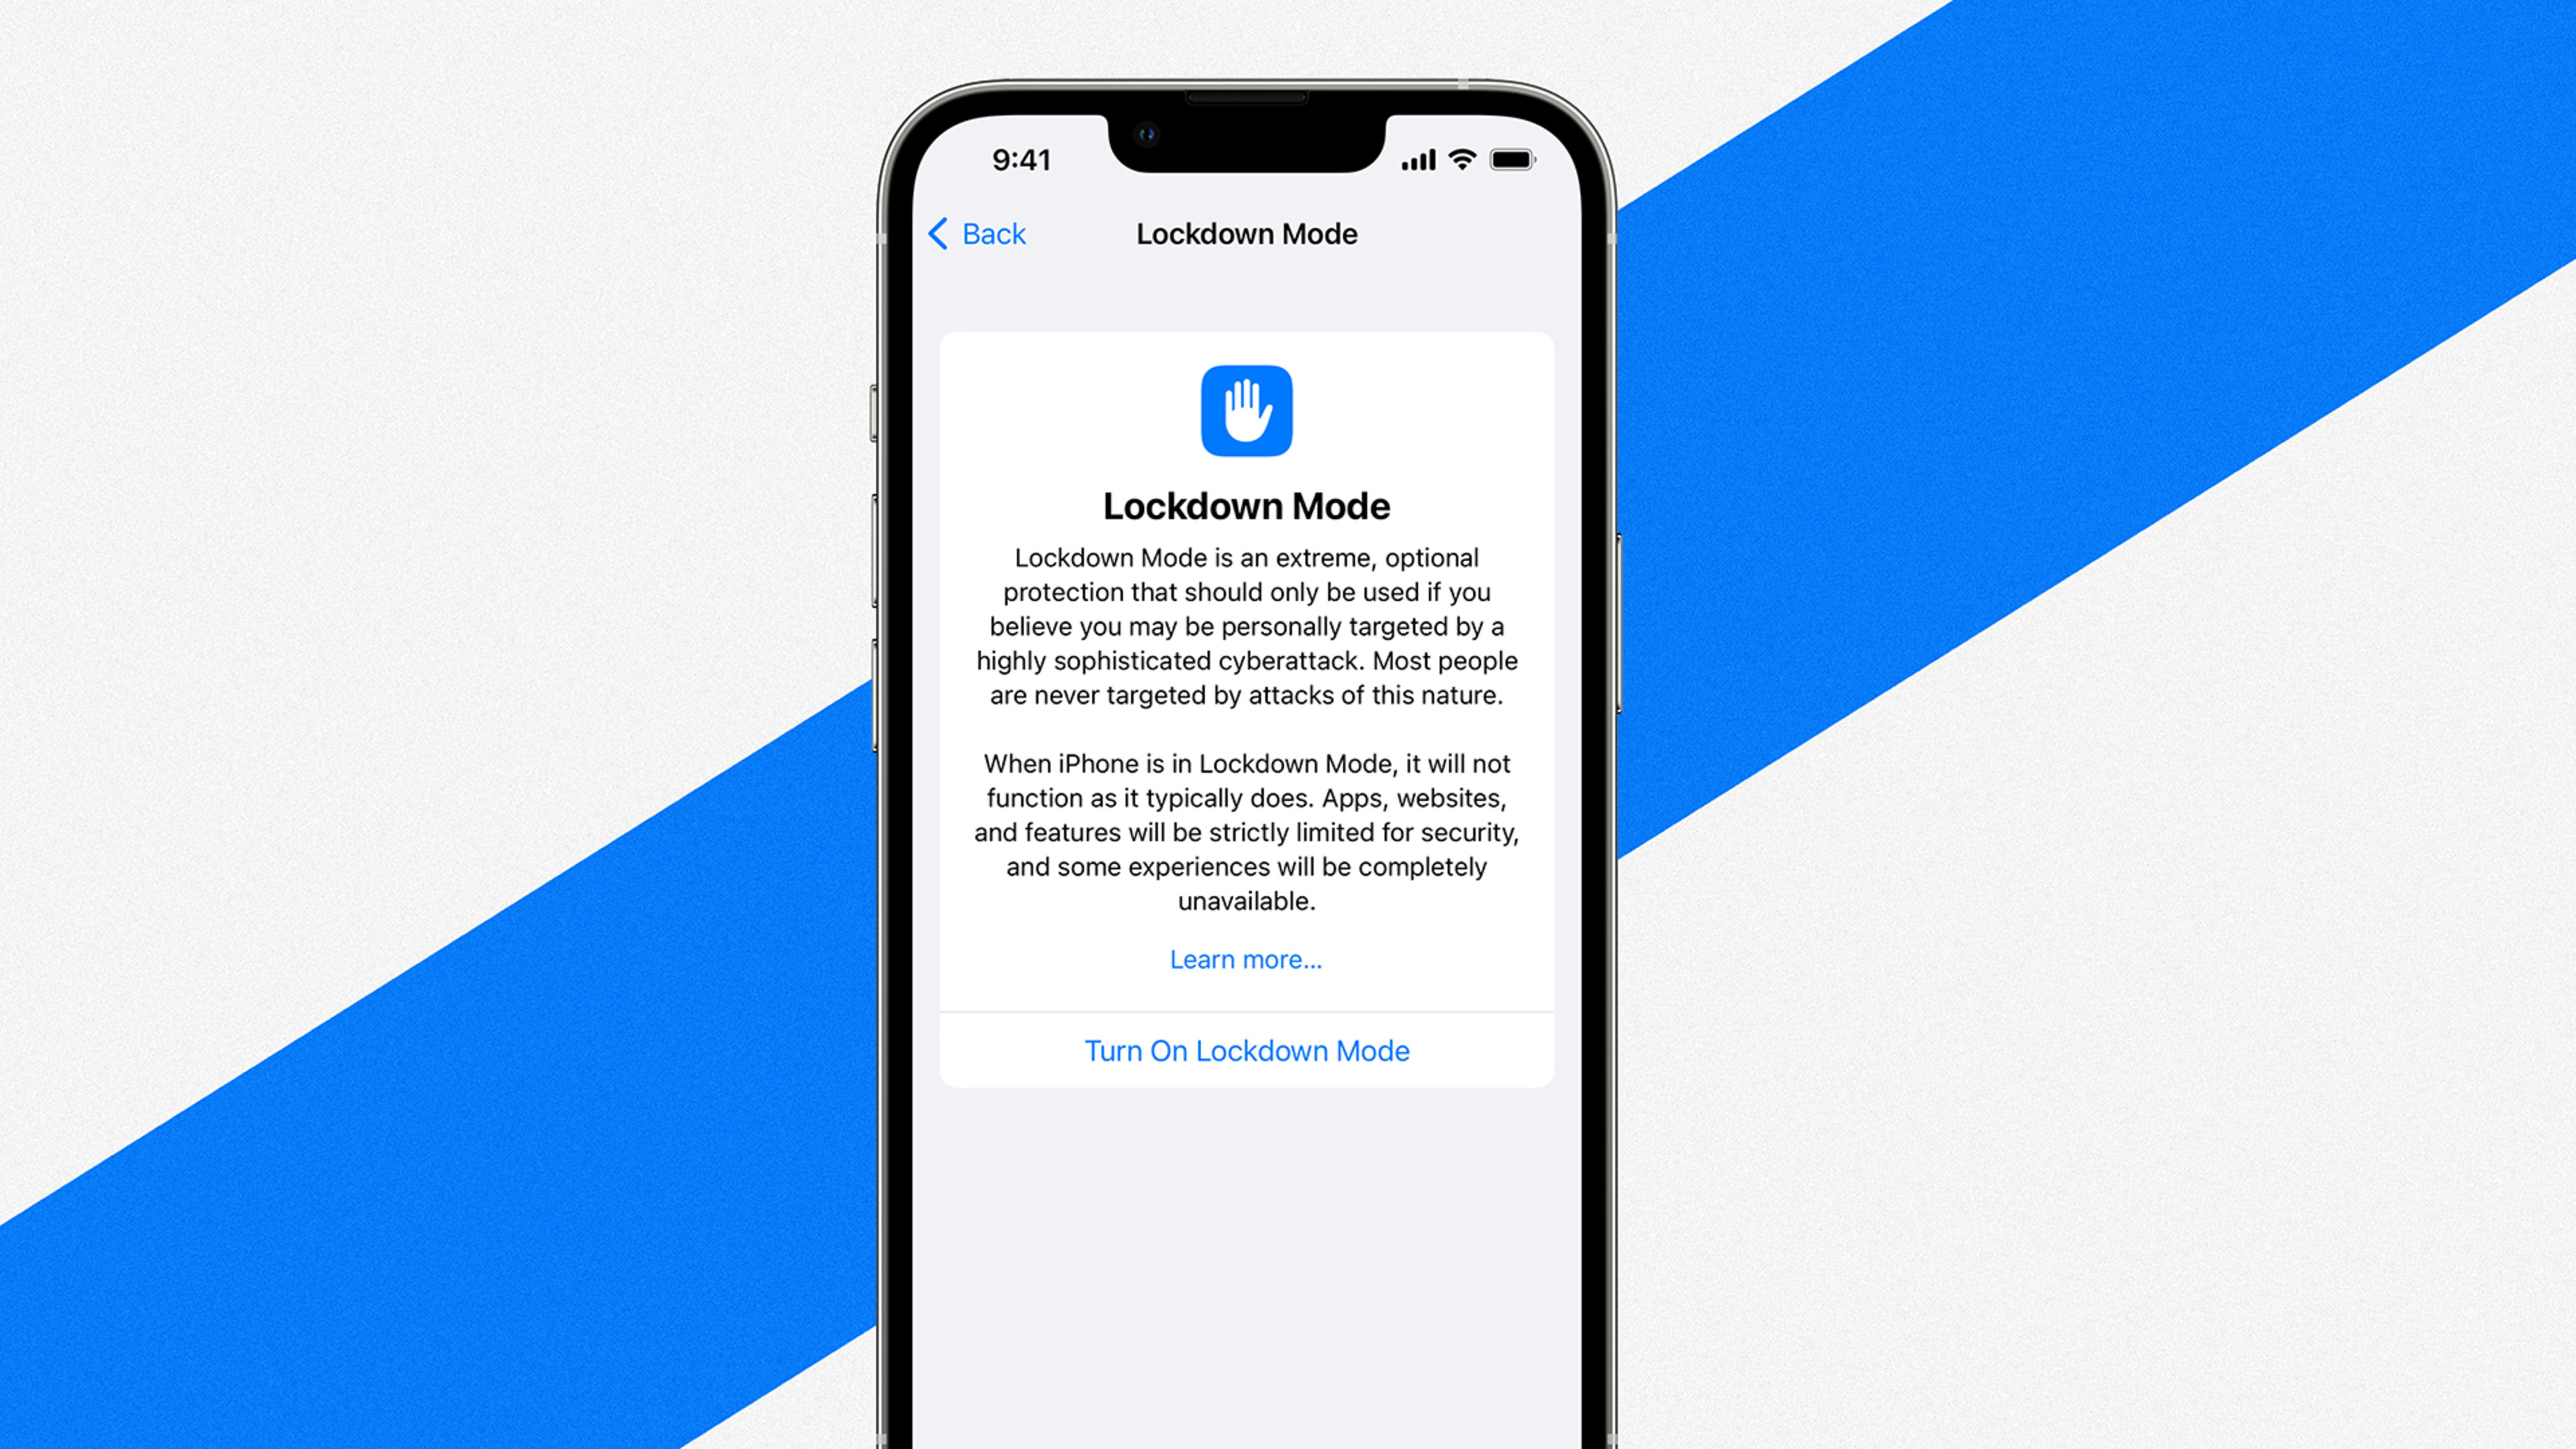 Apple aims to thwart NSO spyware with new iPhone ‘Lockdown Mode’